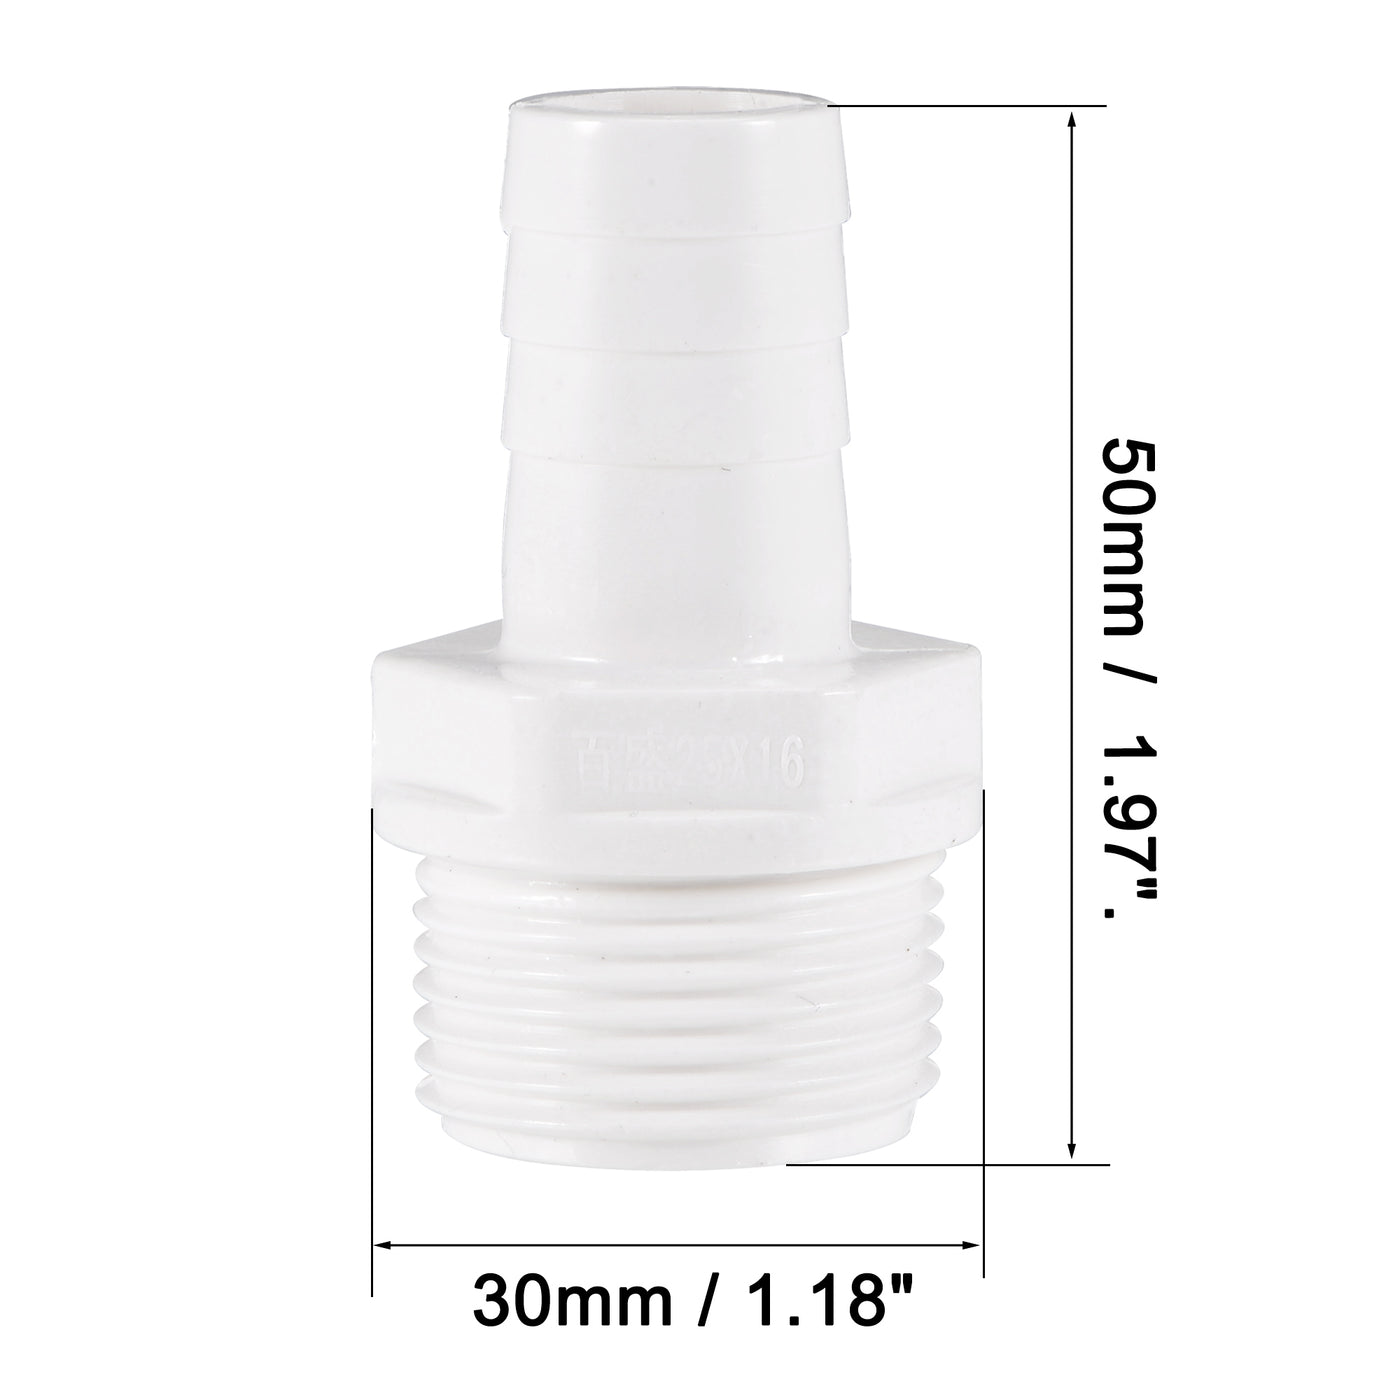 uxcell Uxcell PVC Tube Fitting Adapter 16mm Barbed x G3/4 Male White for Aquariums, Water Tanks, Tubs, Pools 2Pcs